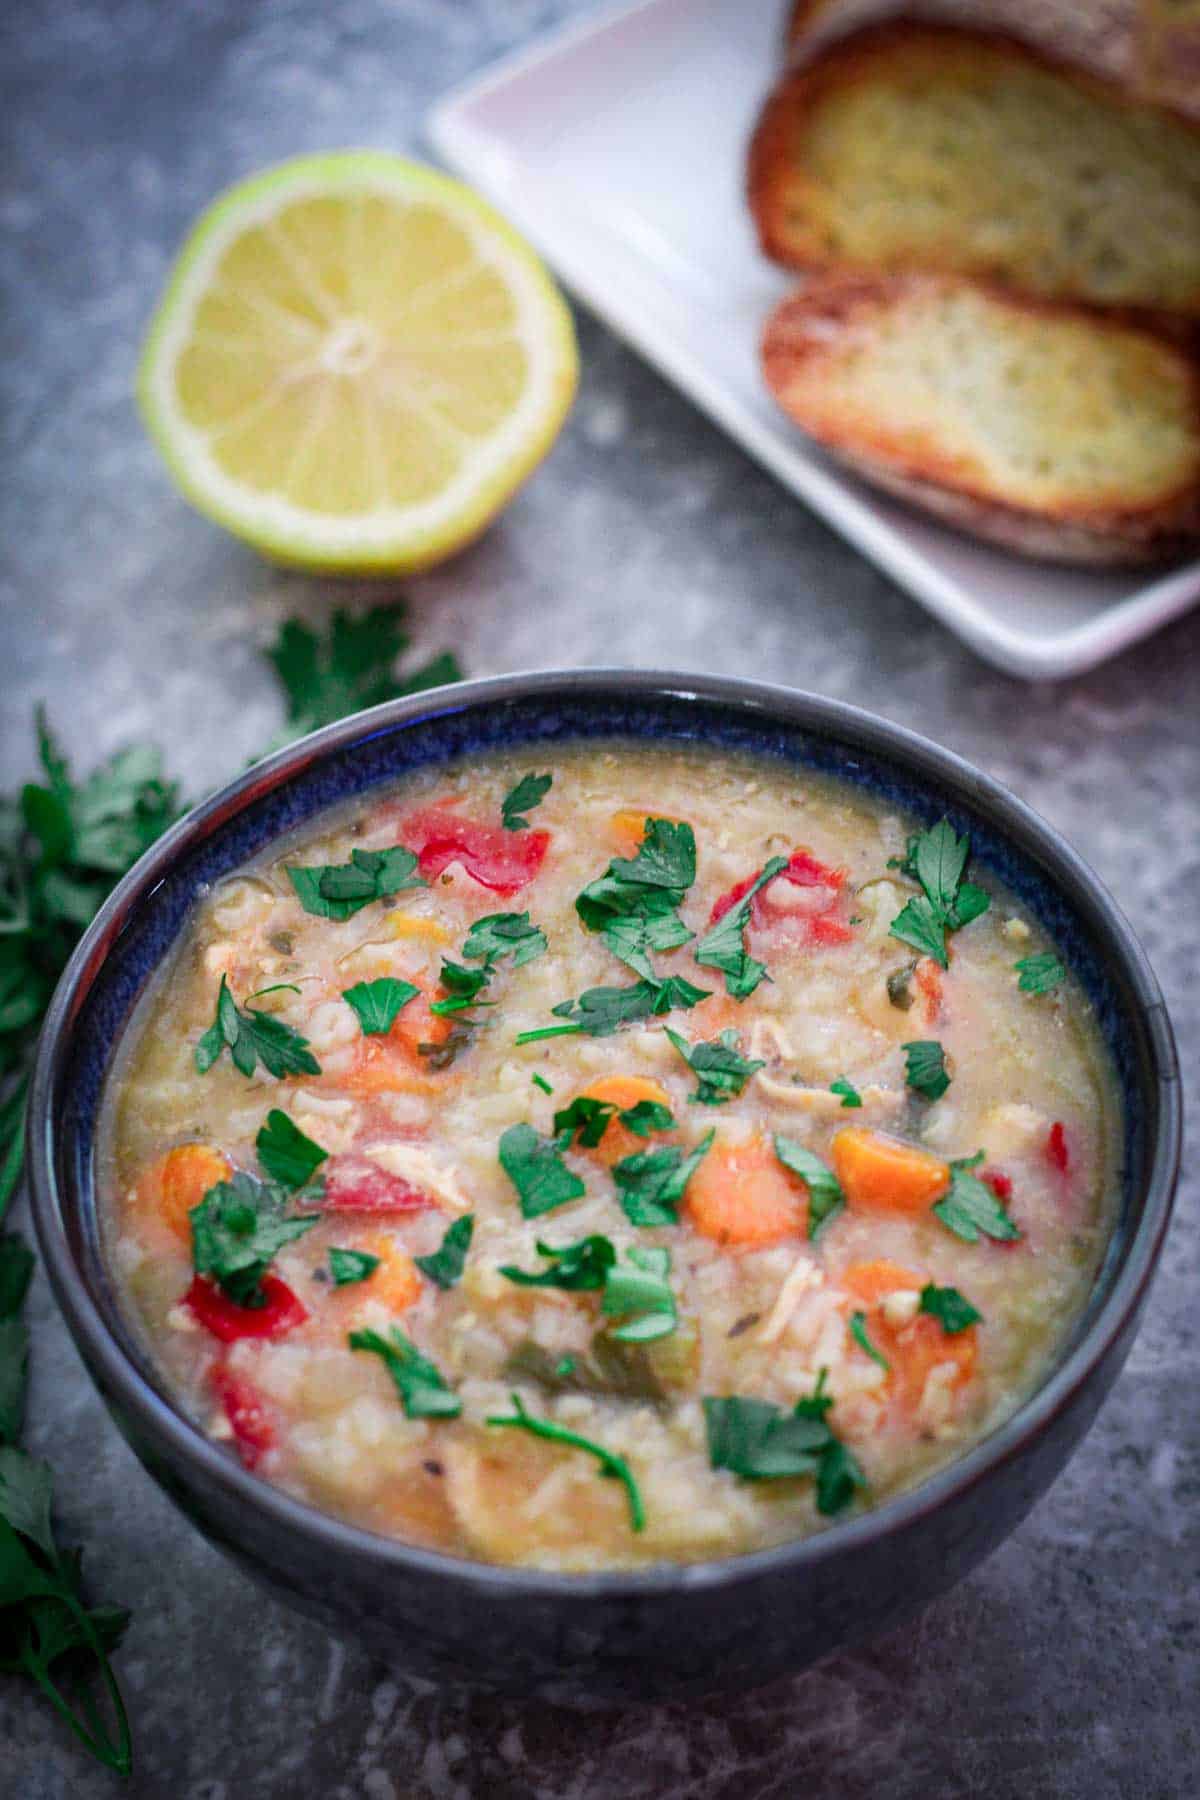 A bowl of chicken and rice soup, garnished with fresh parsley shown with a half lemon and toasted bread in the background.